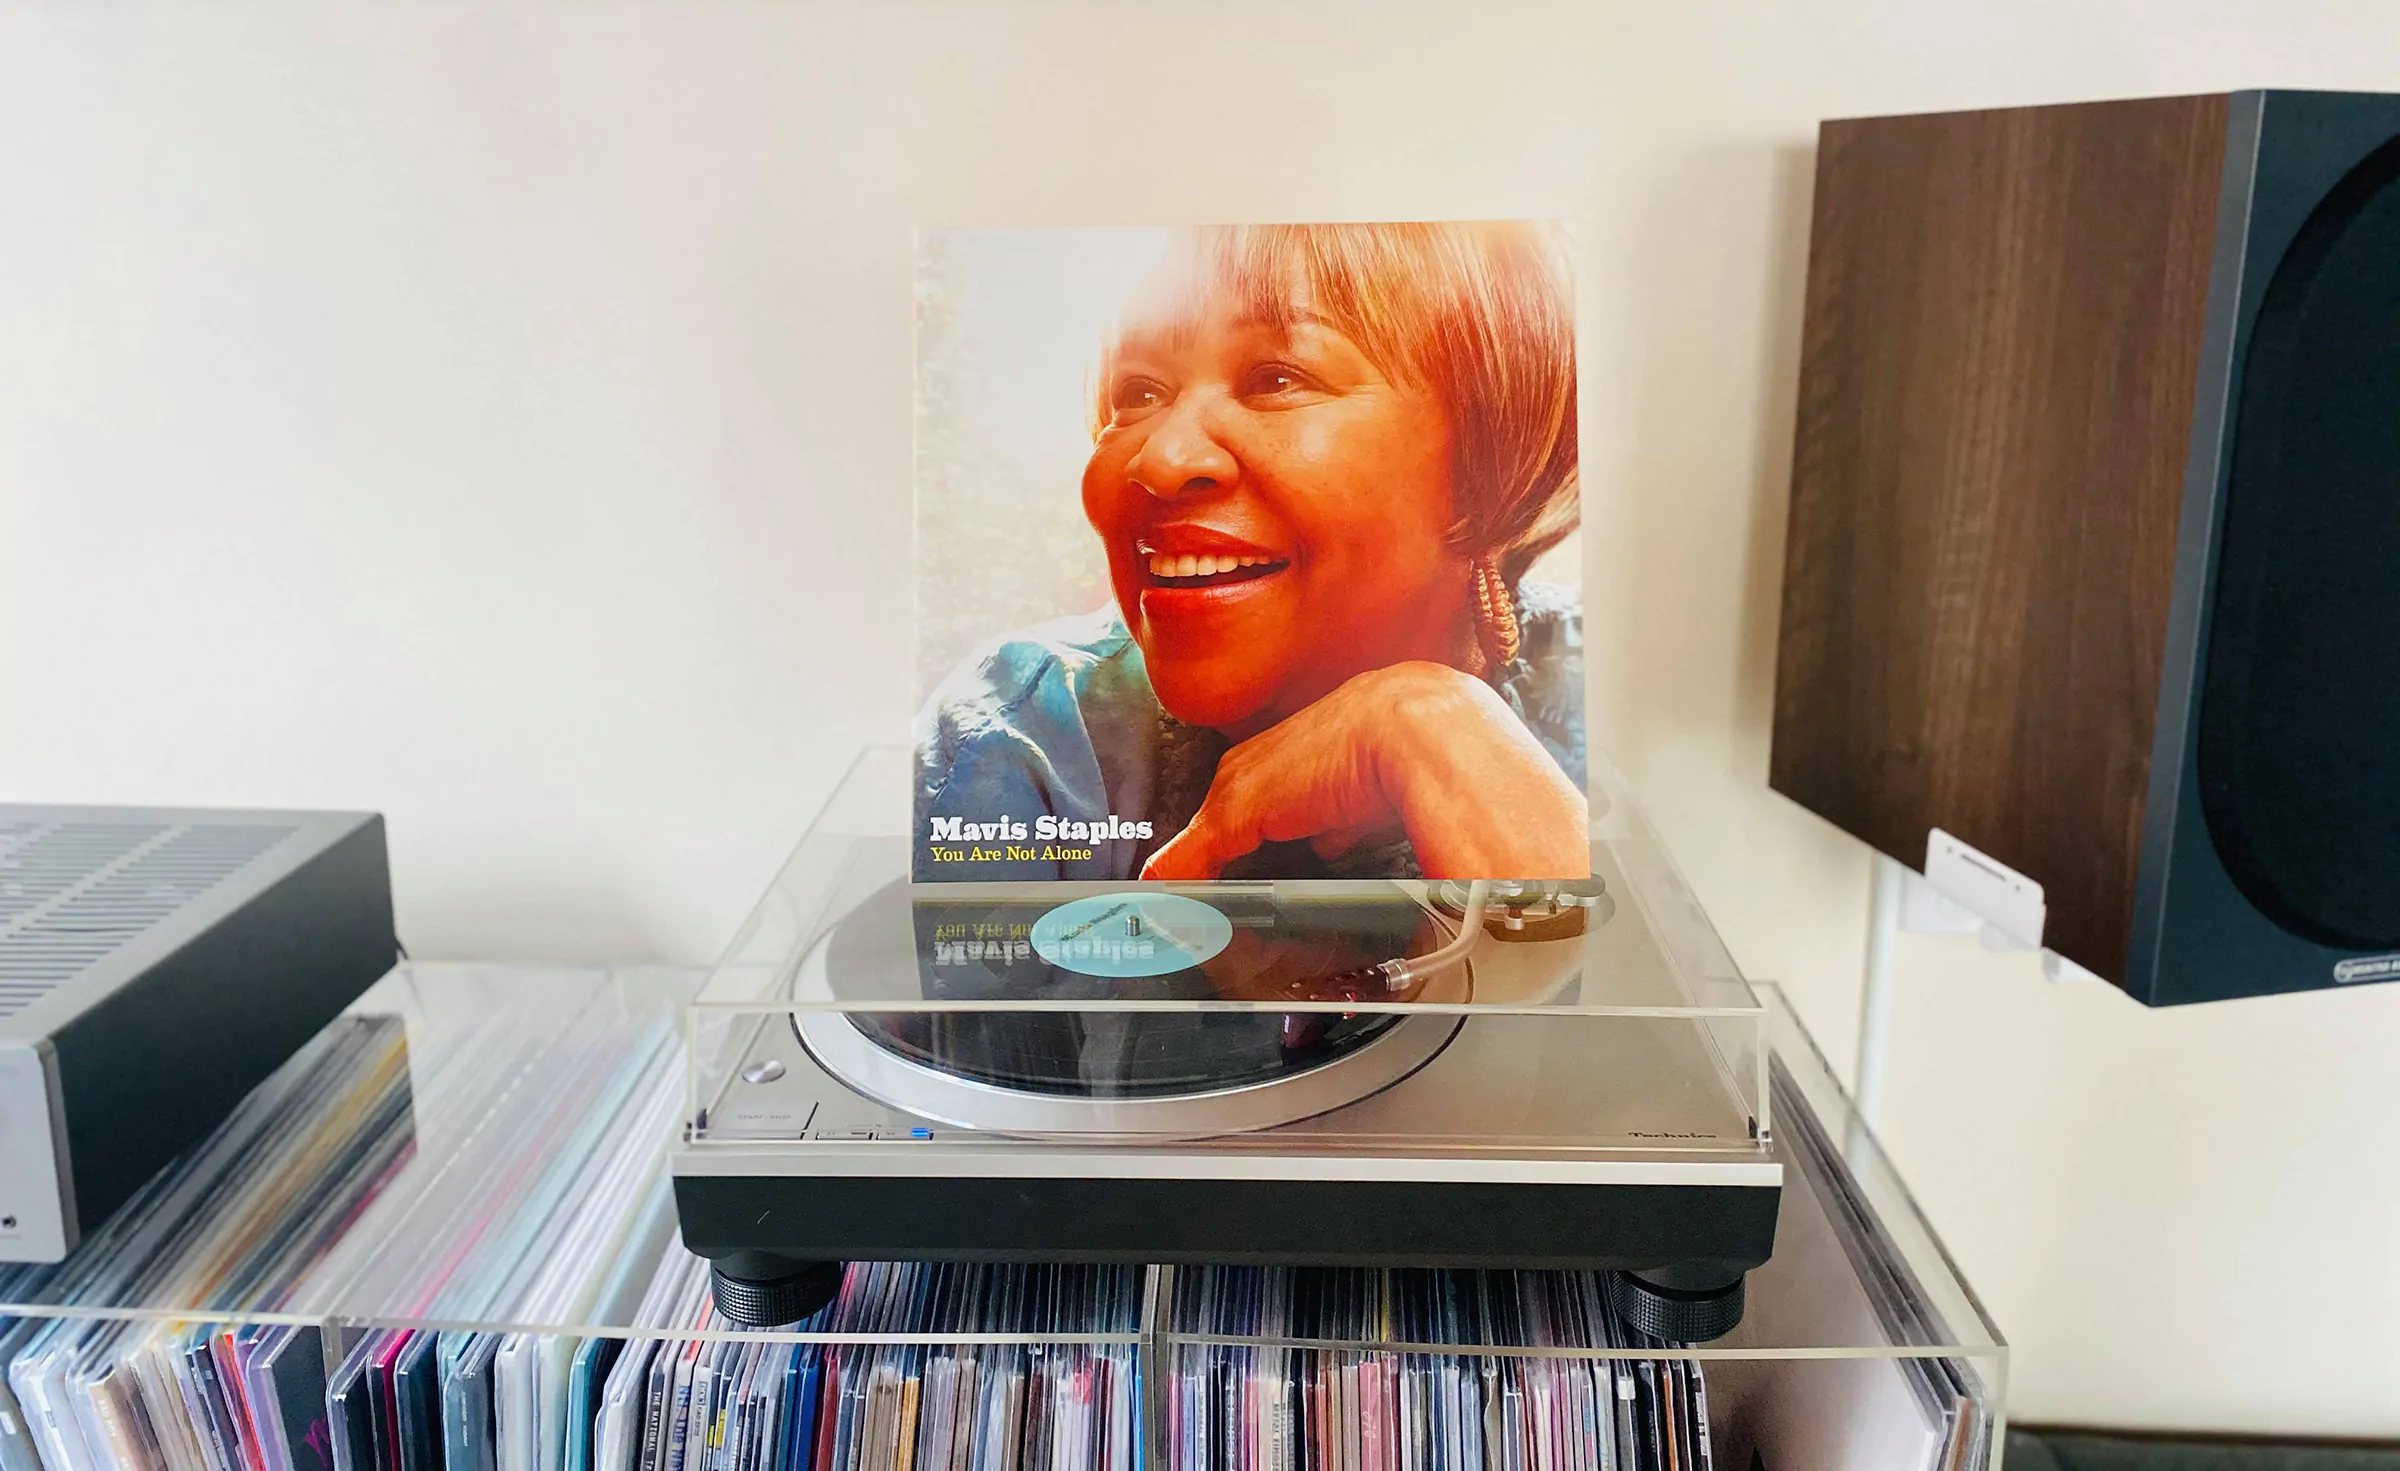 ON THE TURNTABLE: Mavis Staples – You Are Not Alone